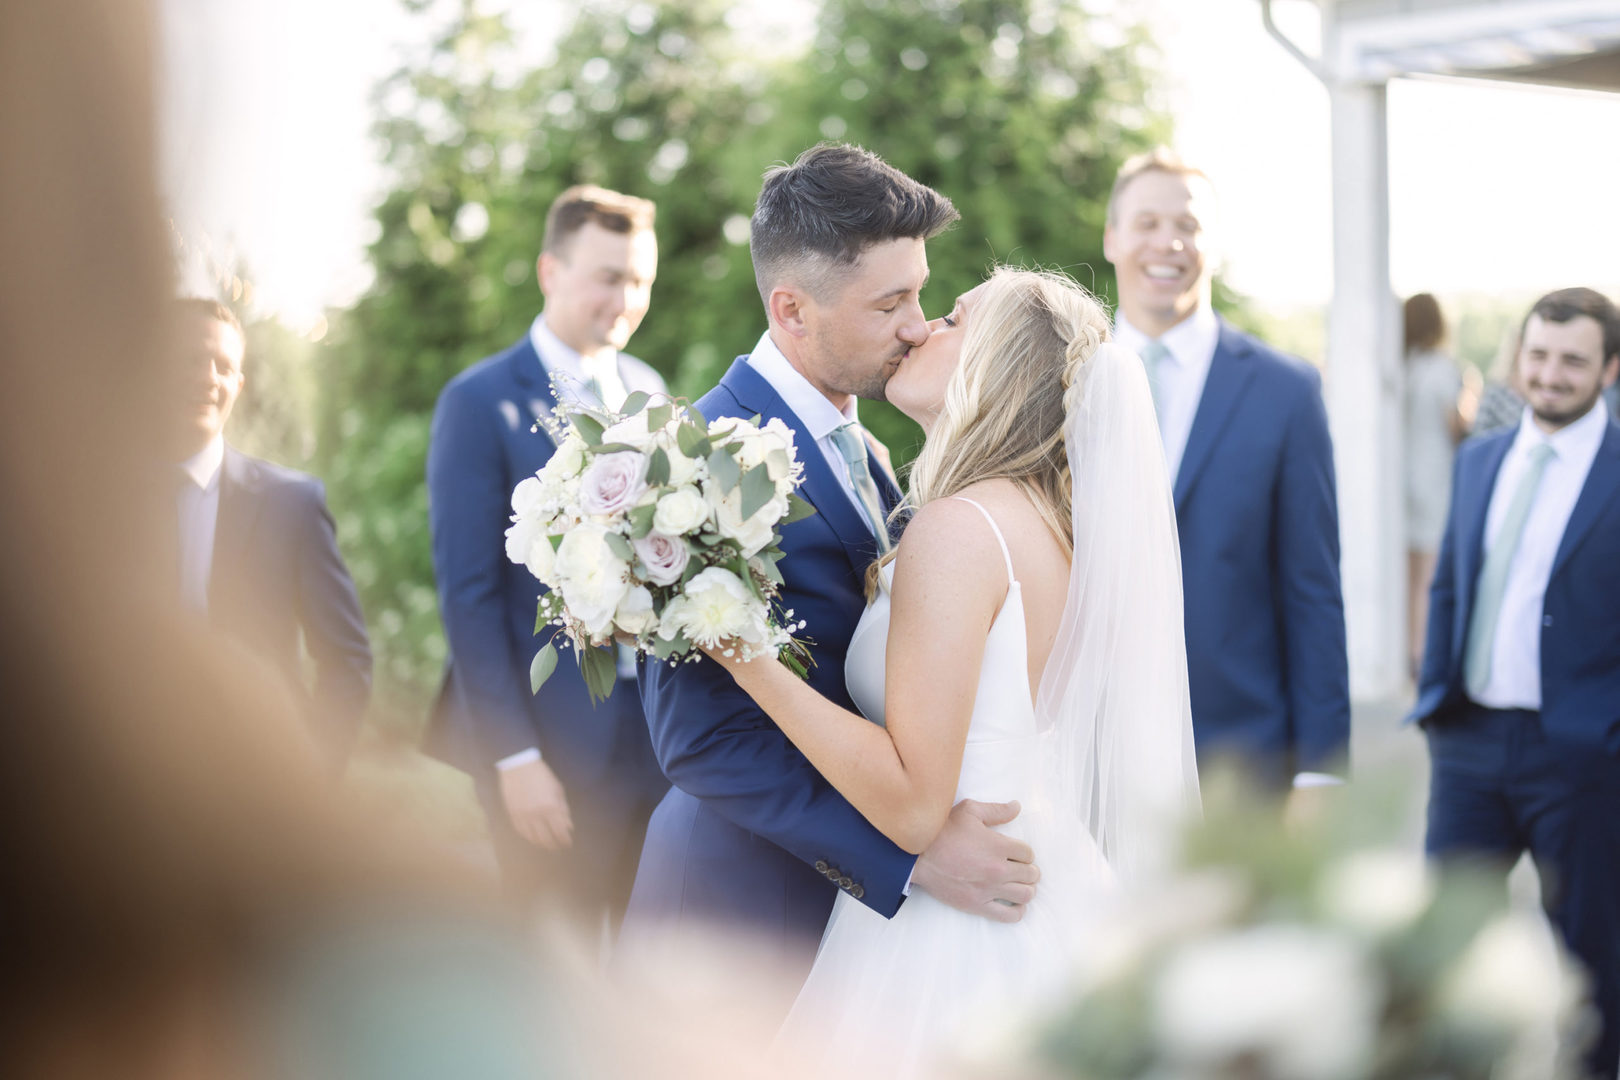 bride and groom kiss amongst their wedding party after being announced husband and wife at Allenbrook Farms luxury wedding venue